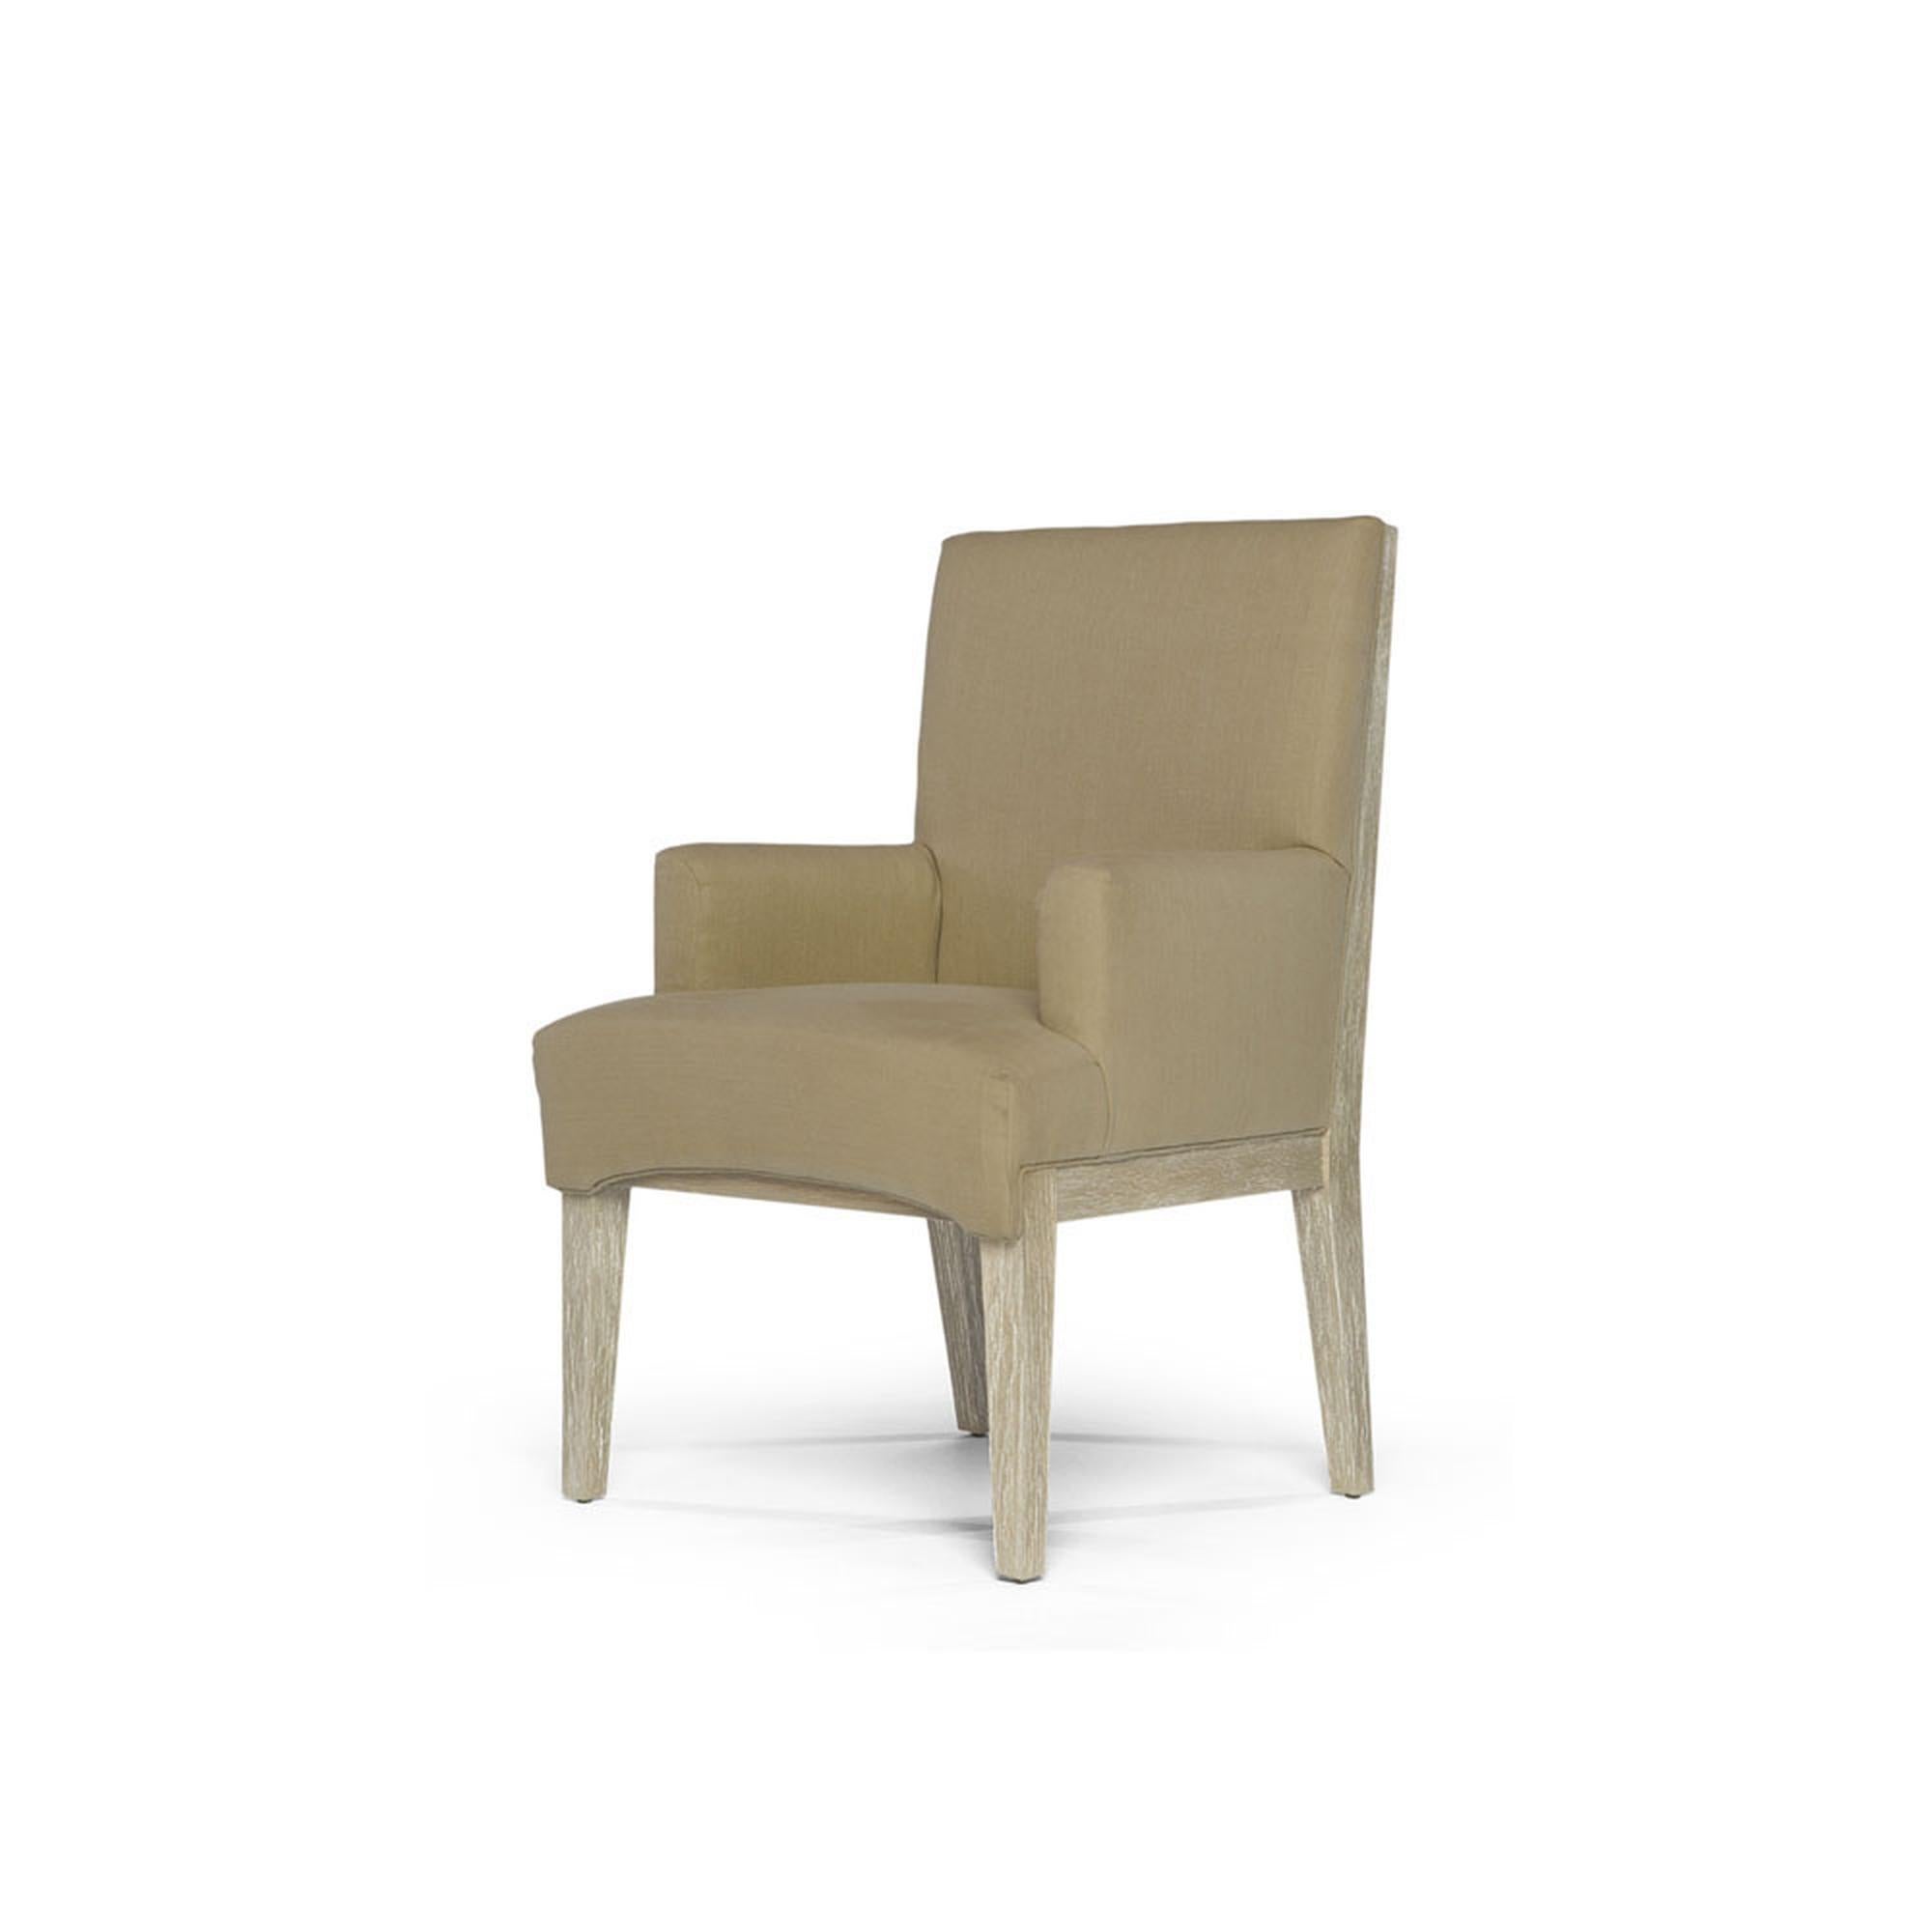 Mexican Capistrano Dining Armchair in Chocolate & Onyx Finish by Innova Luxuxy Group For Sale